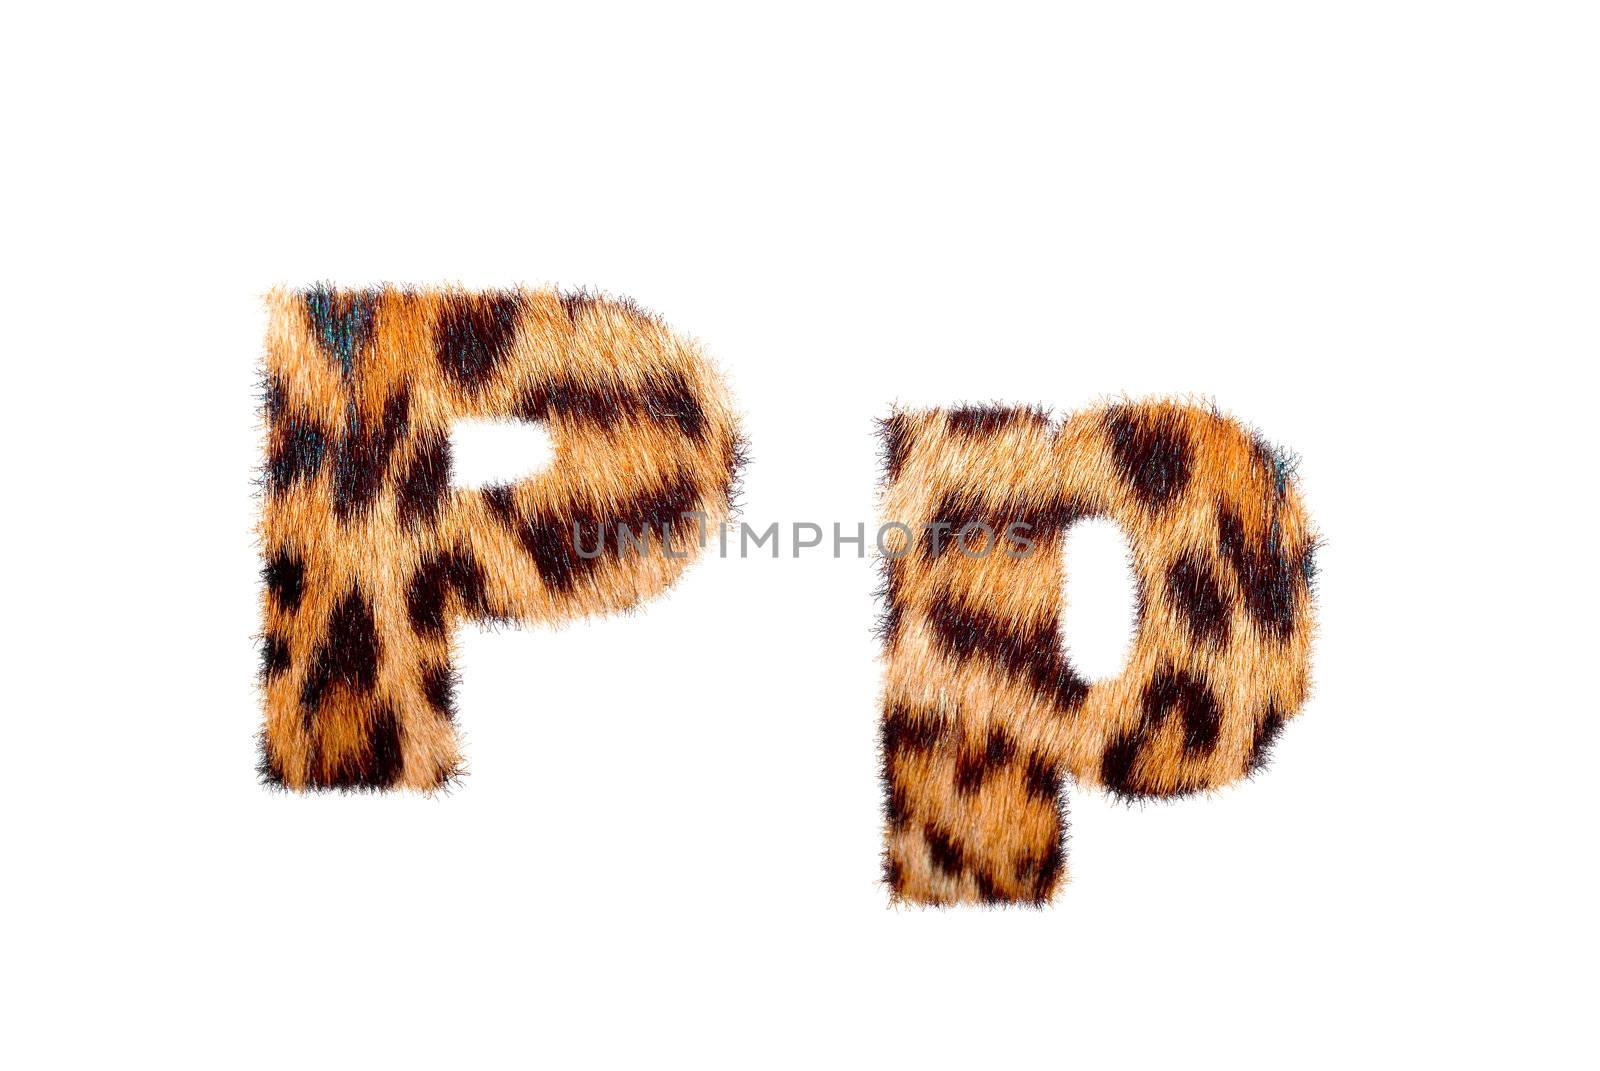 Custom english text base on leopard skin by sasilsolutions